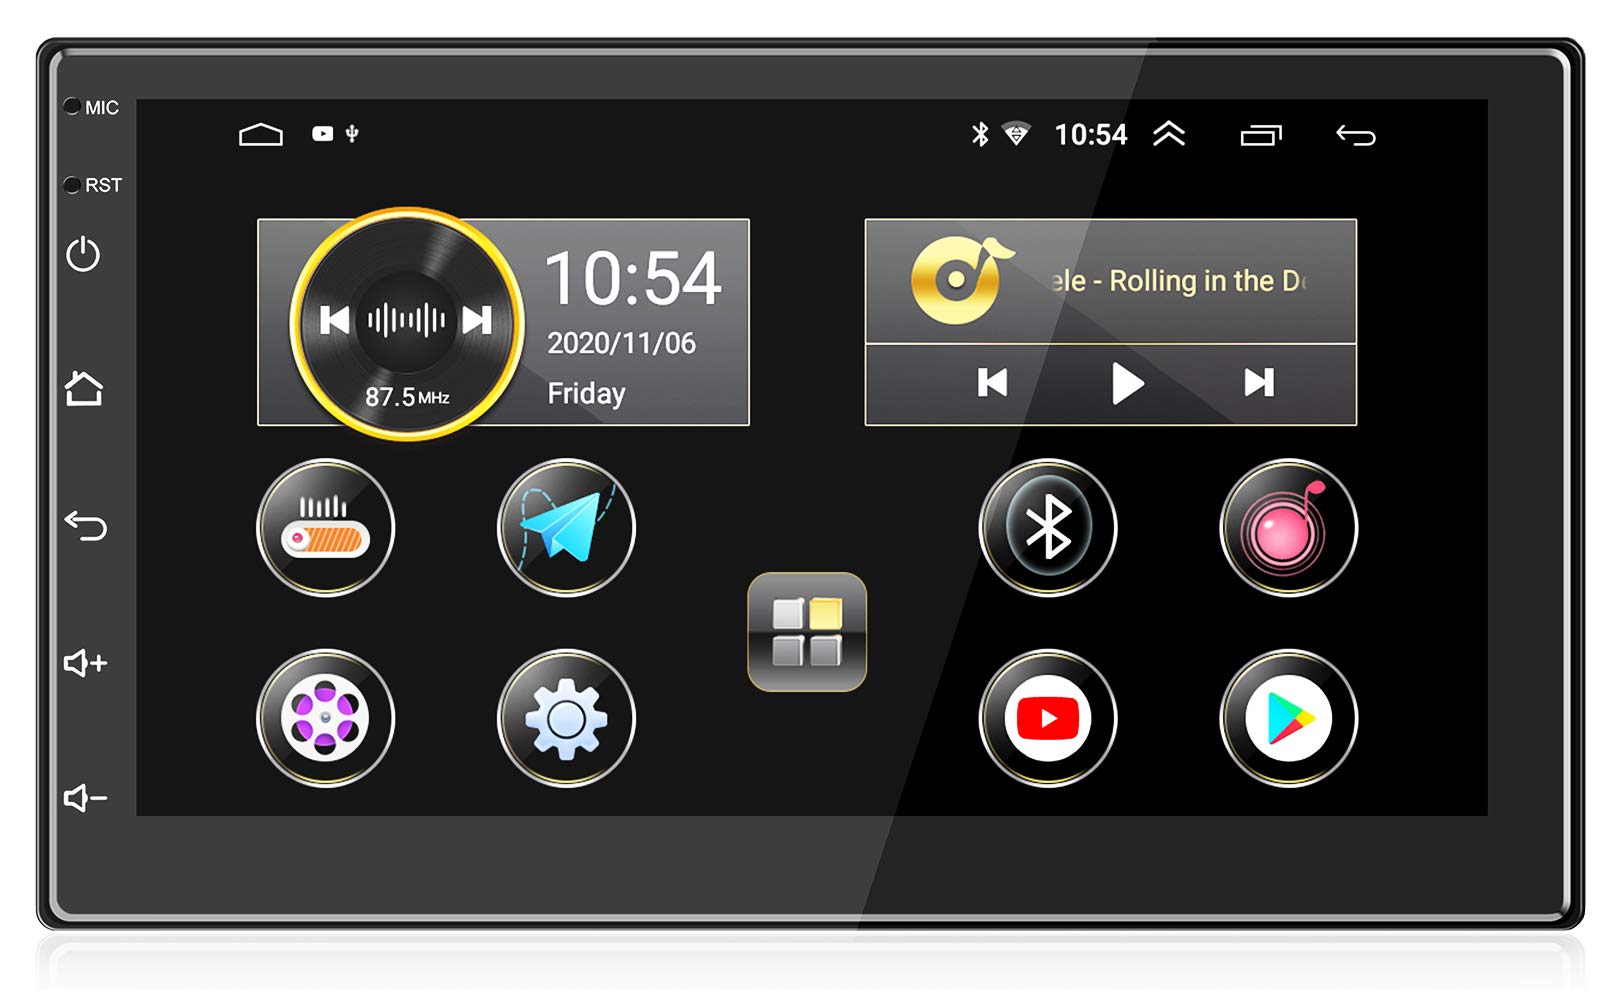 ANKEWAY New 7 Inch 2g + 32g] Android 101 car Stereo Double Din Built-in HiFi+WiFi+Bluetooth+RDS+FM+AM+gPS Navigation, 1080P HD T